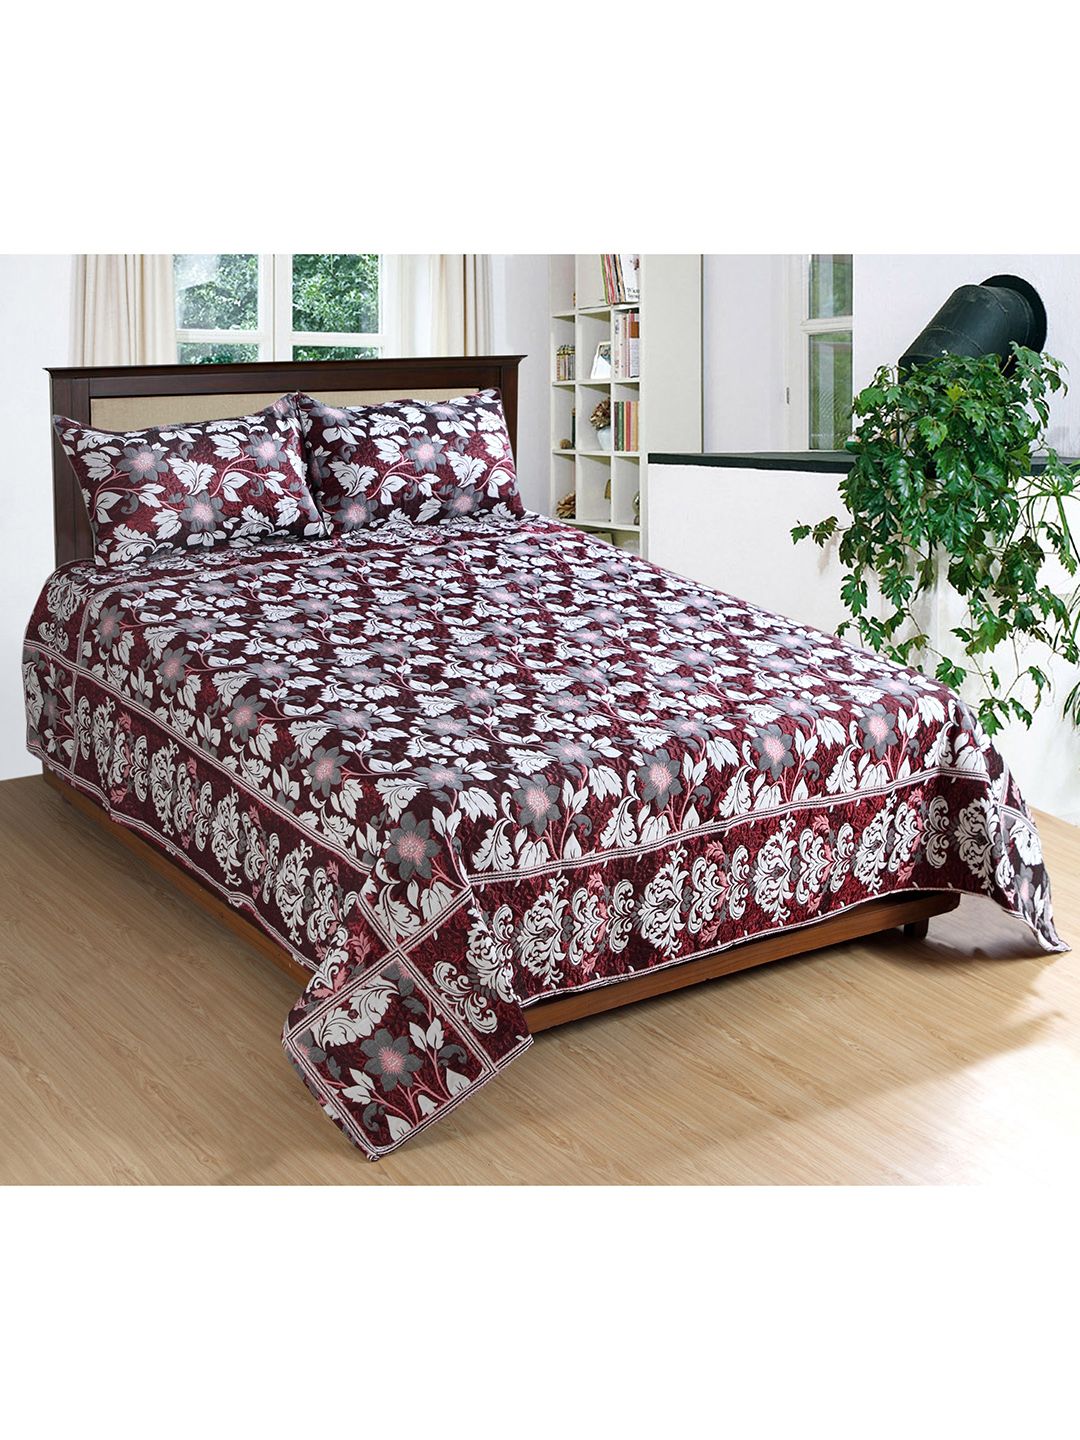 Varde Unisex Maroon & White Woven Design Double Bed Cover With 2 Pillow Covers Price in India